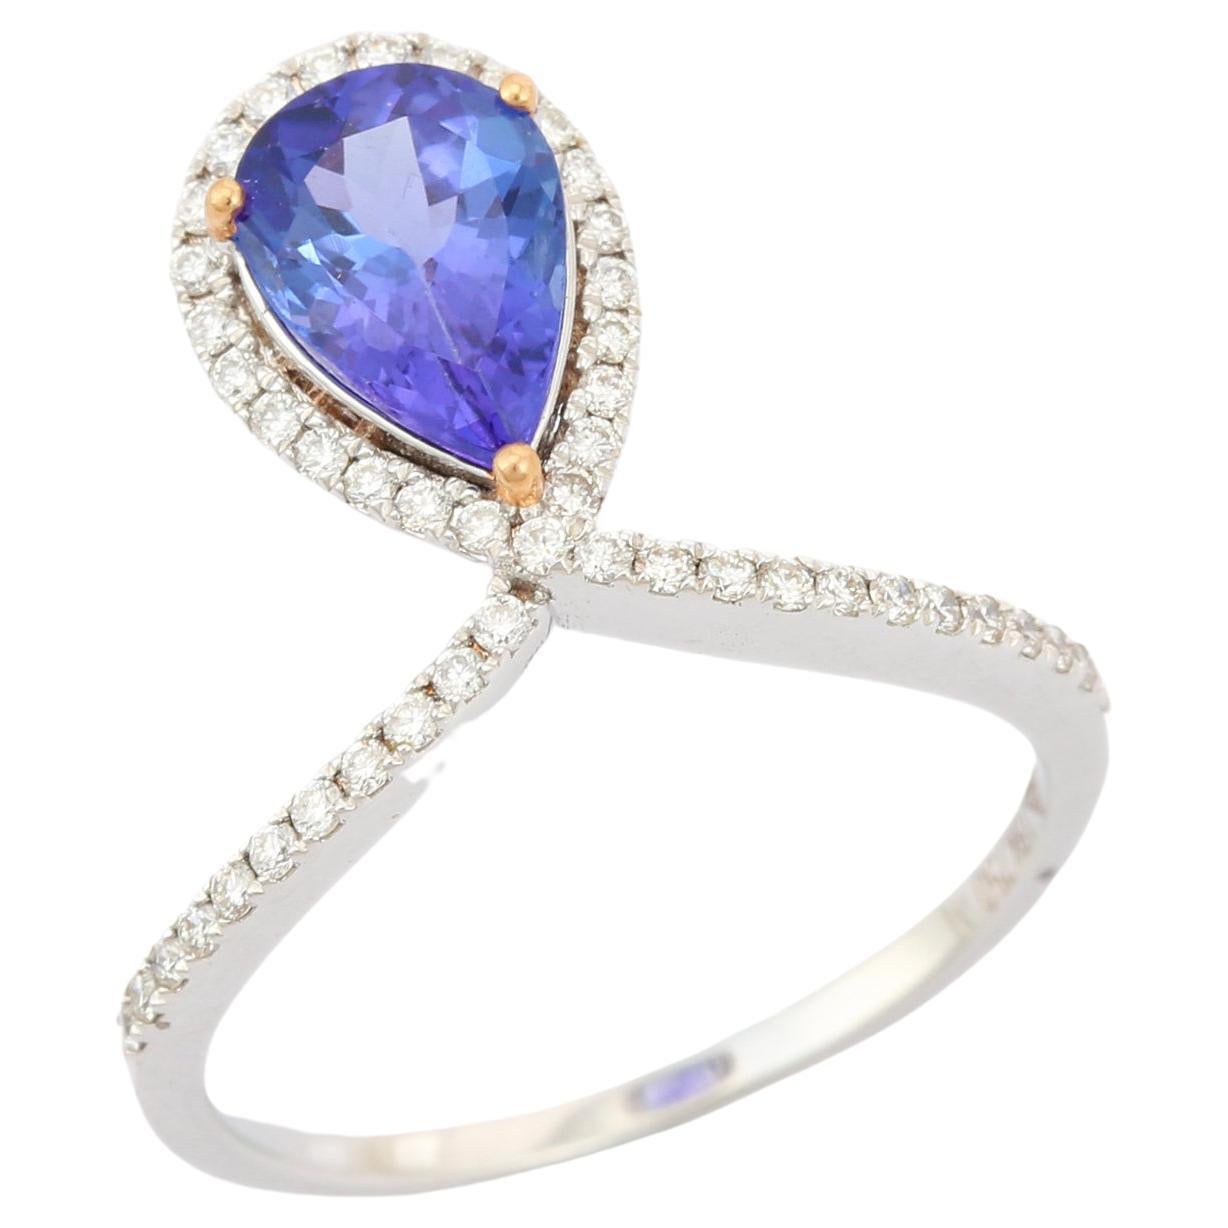 For Sale:  18K Tanzanite and Diamond Ring in White Gold Pear Shape 1.19 Carat